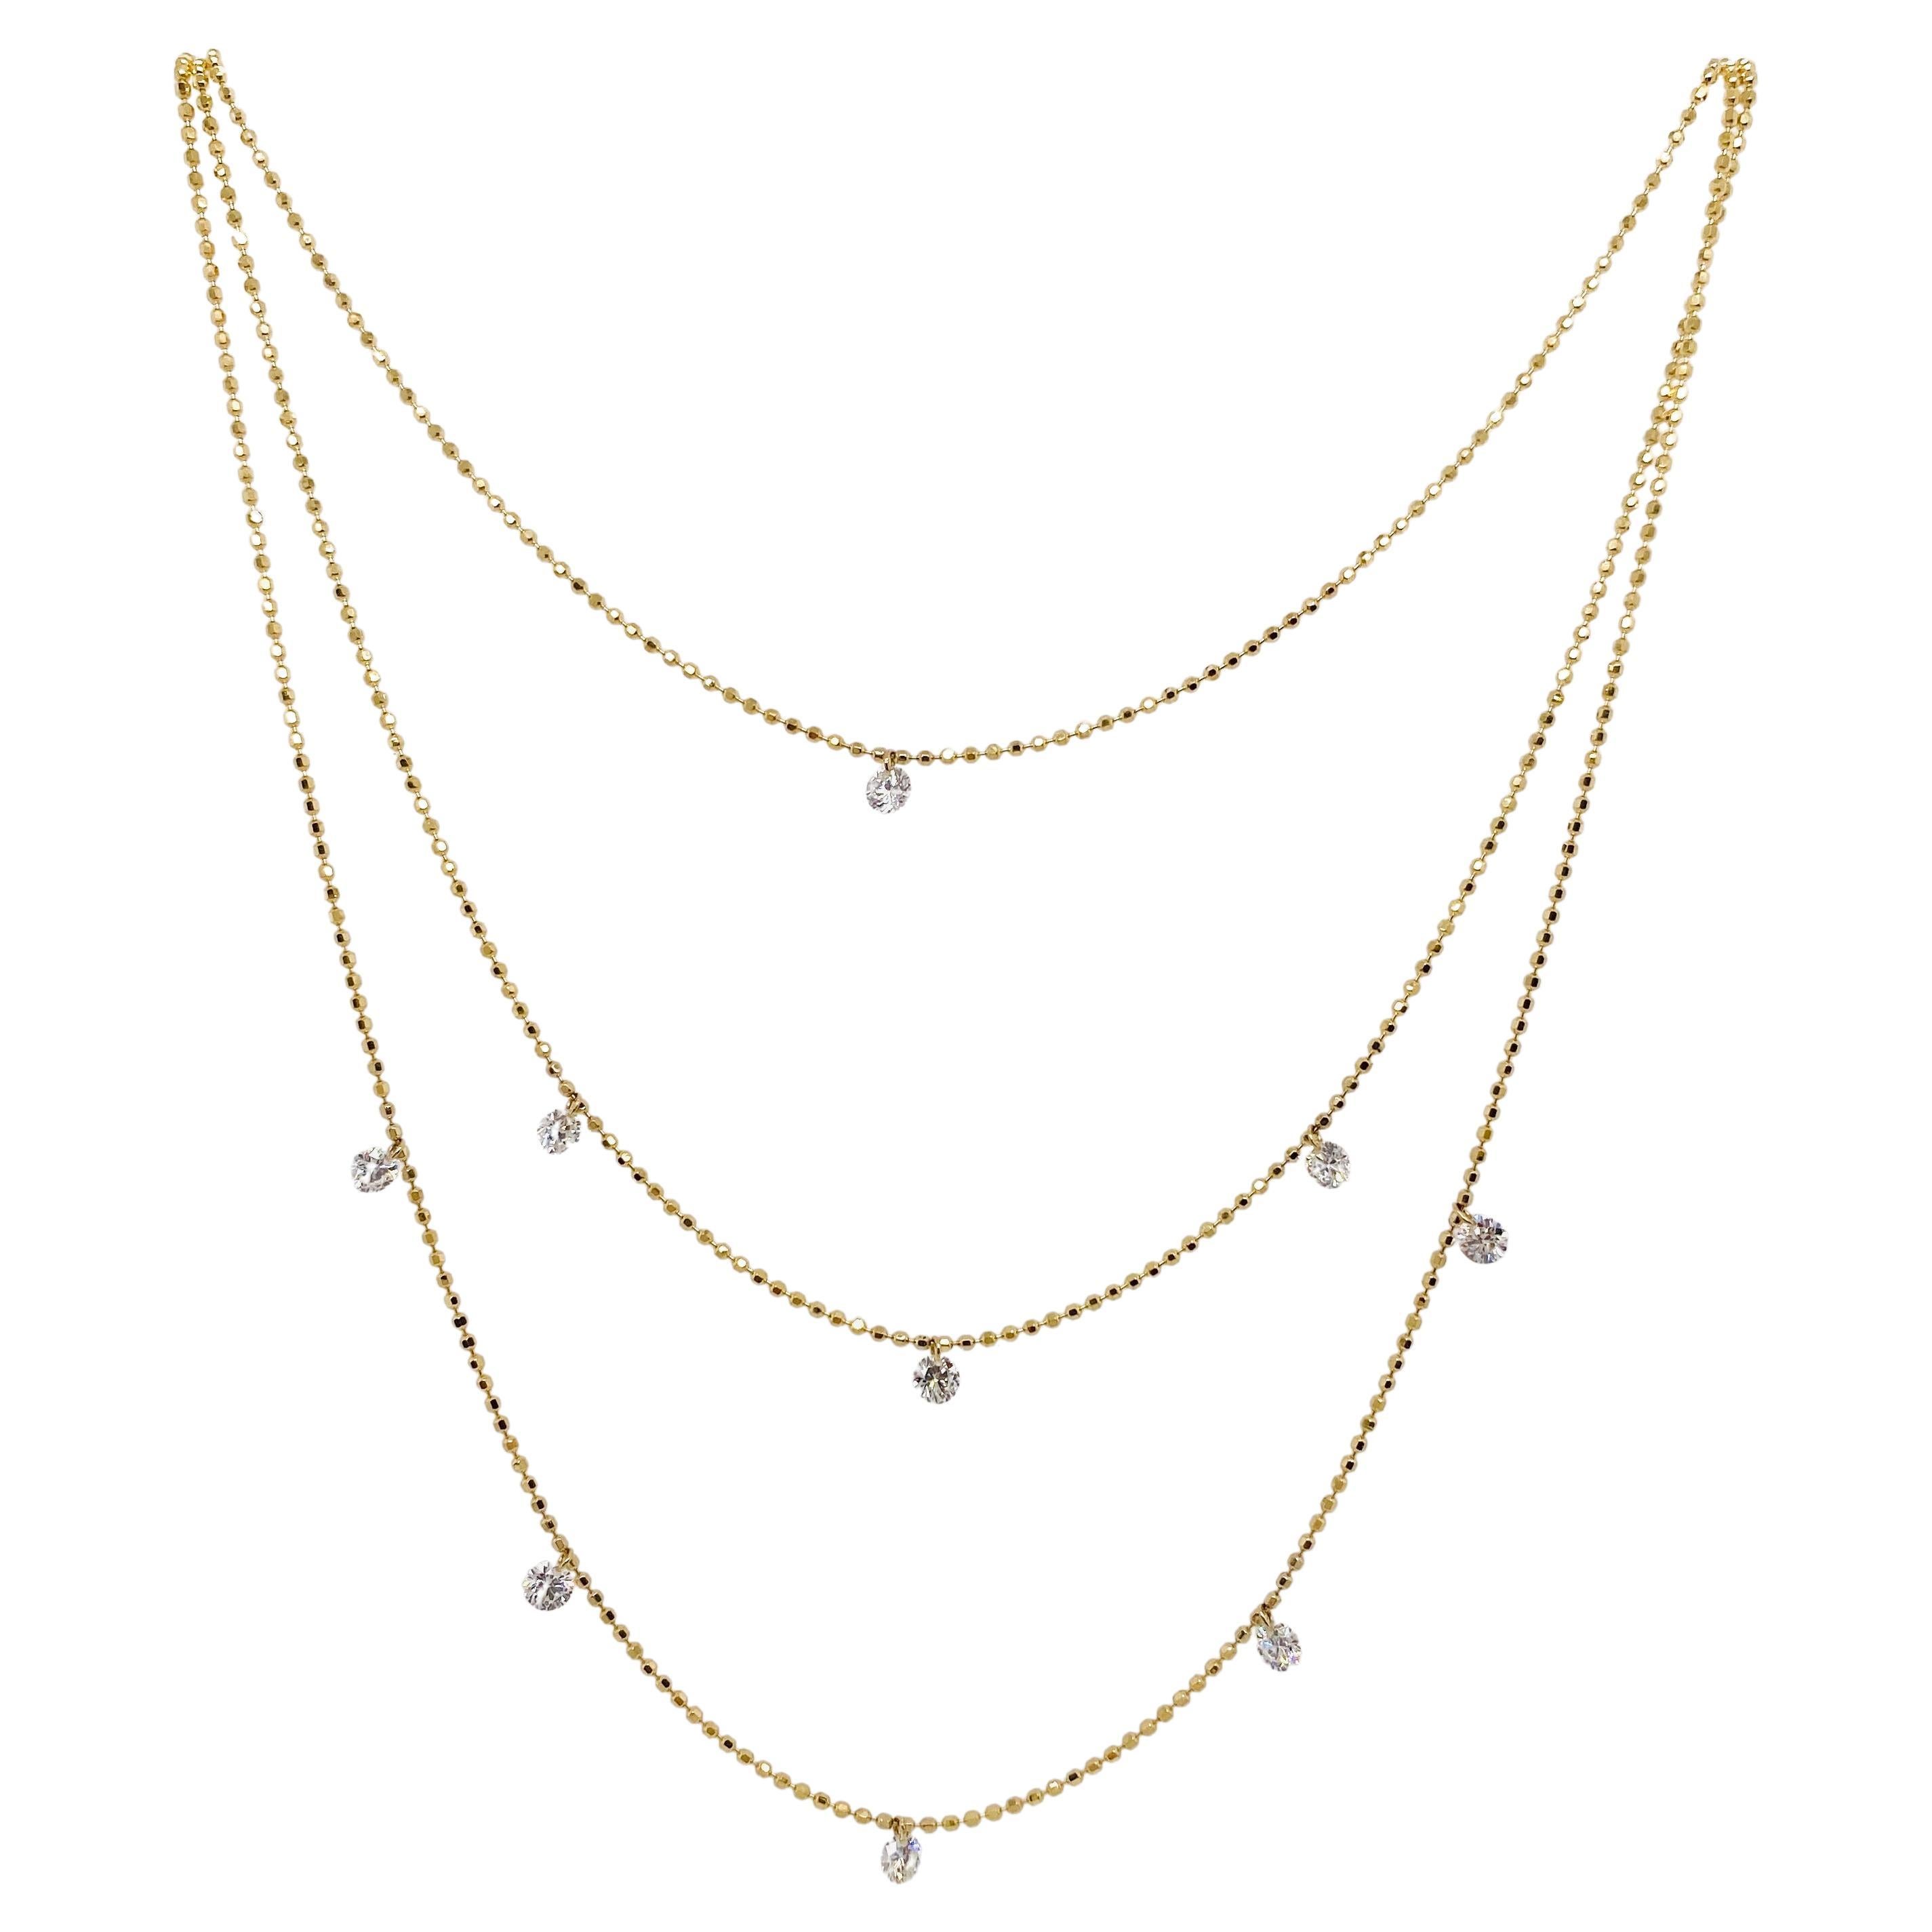 Dashing Diamond Three Layer Necklace .72 Carats in 14K Yellow Gold Beaded Chain For Sale